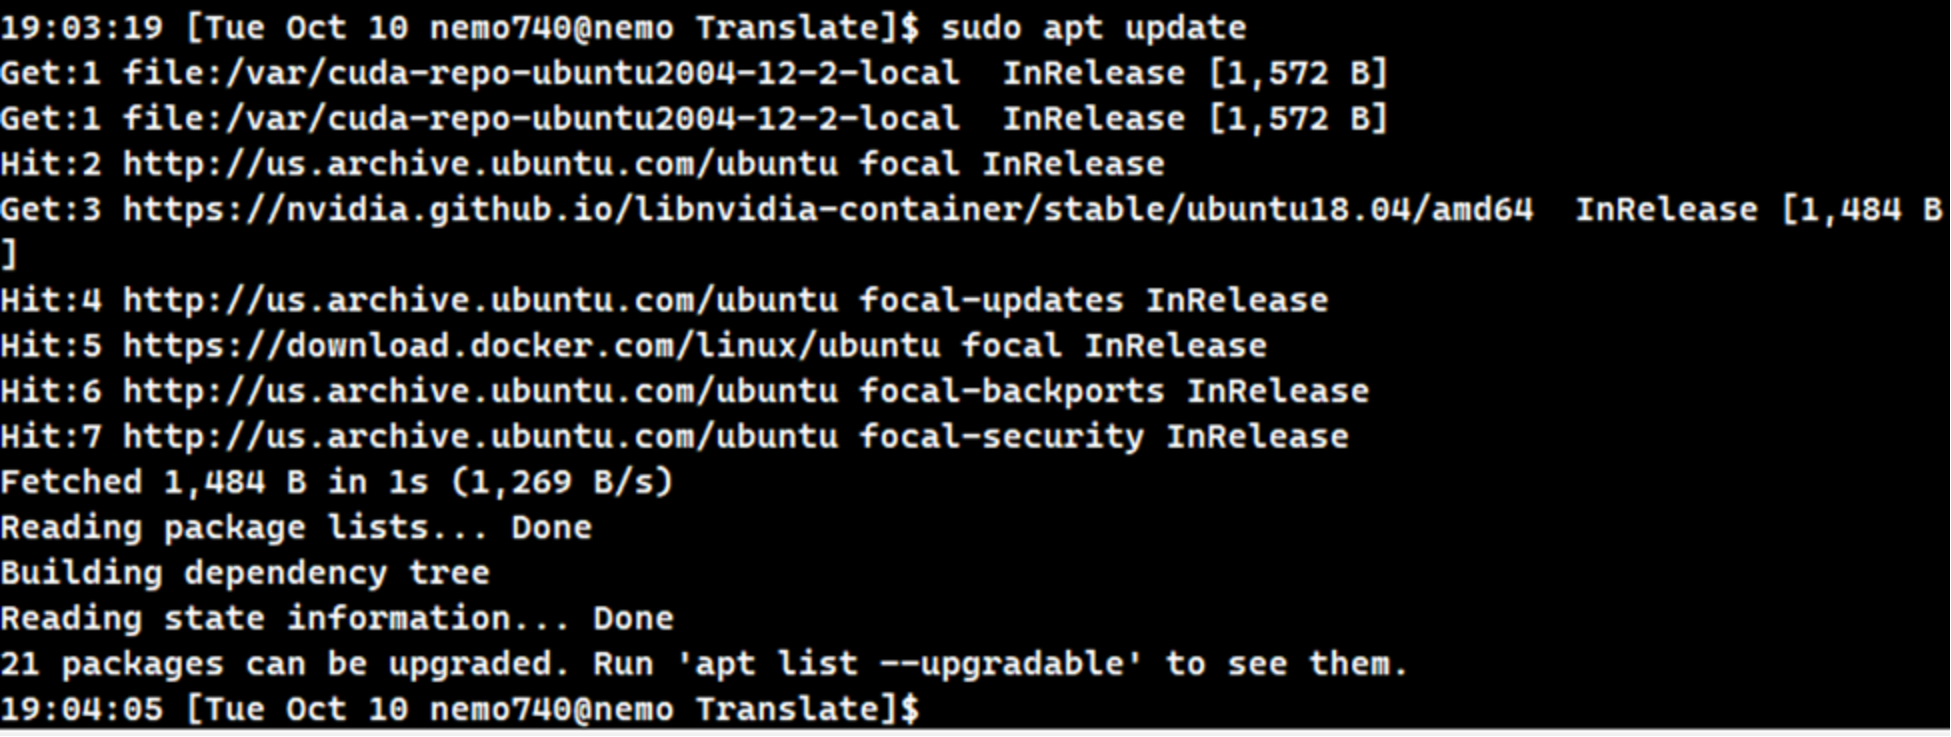 Code and output of updating sudo apt update command